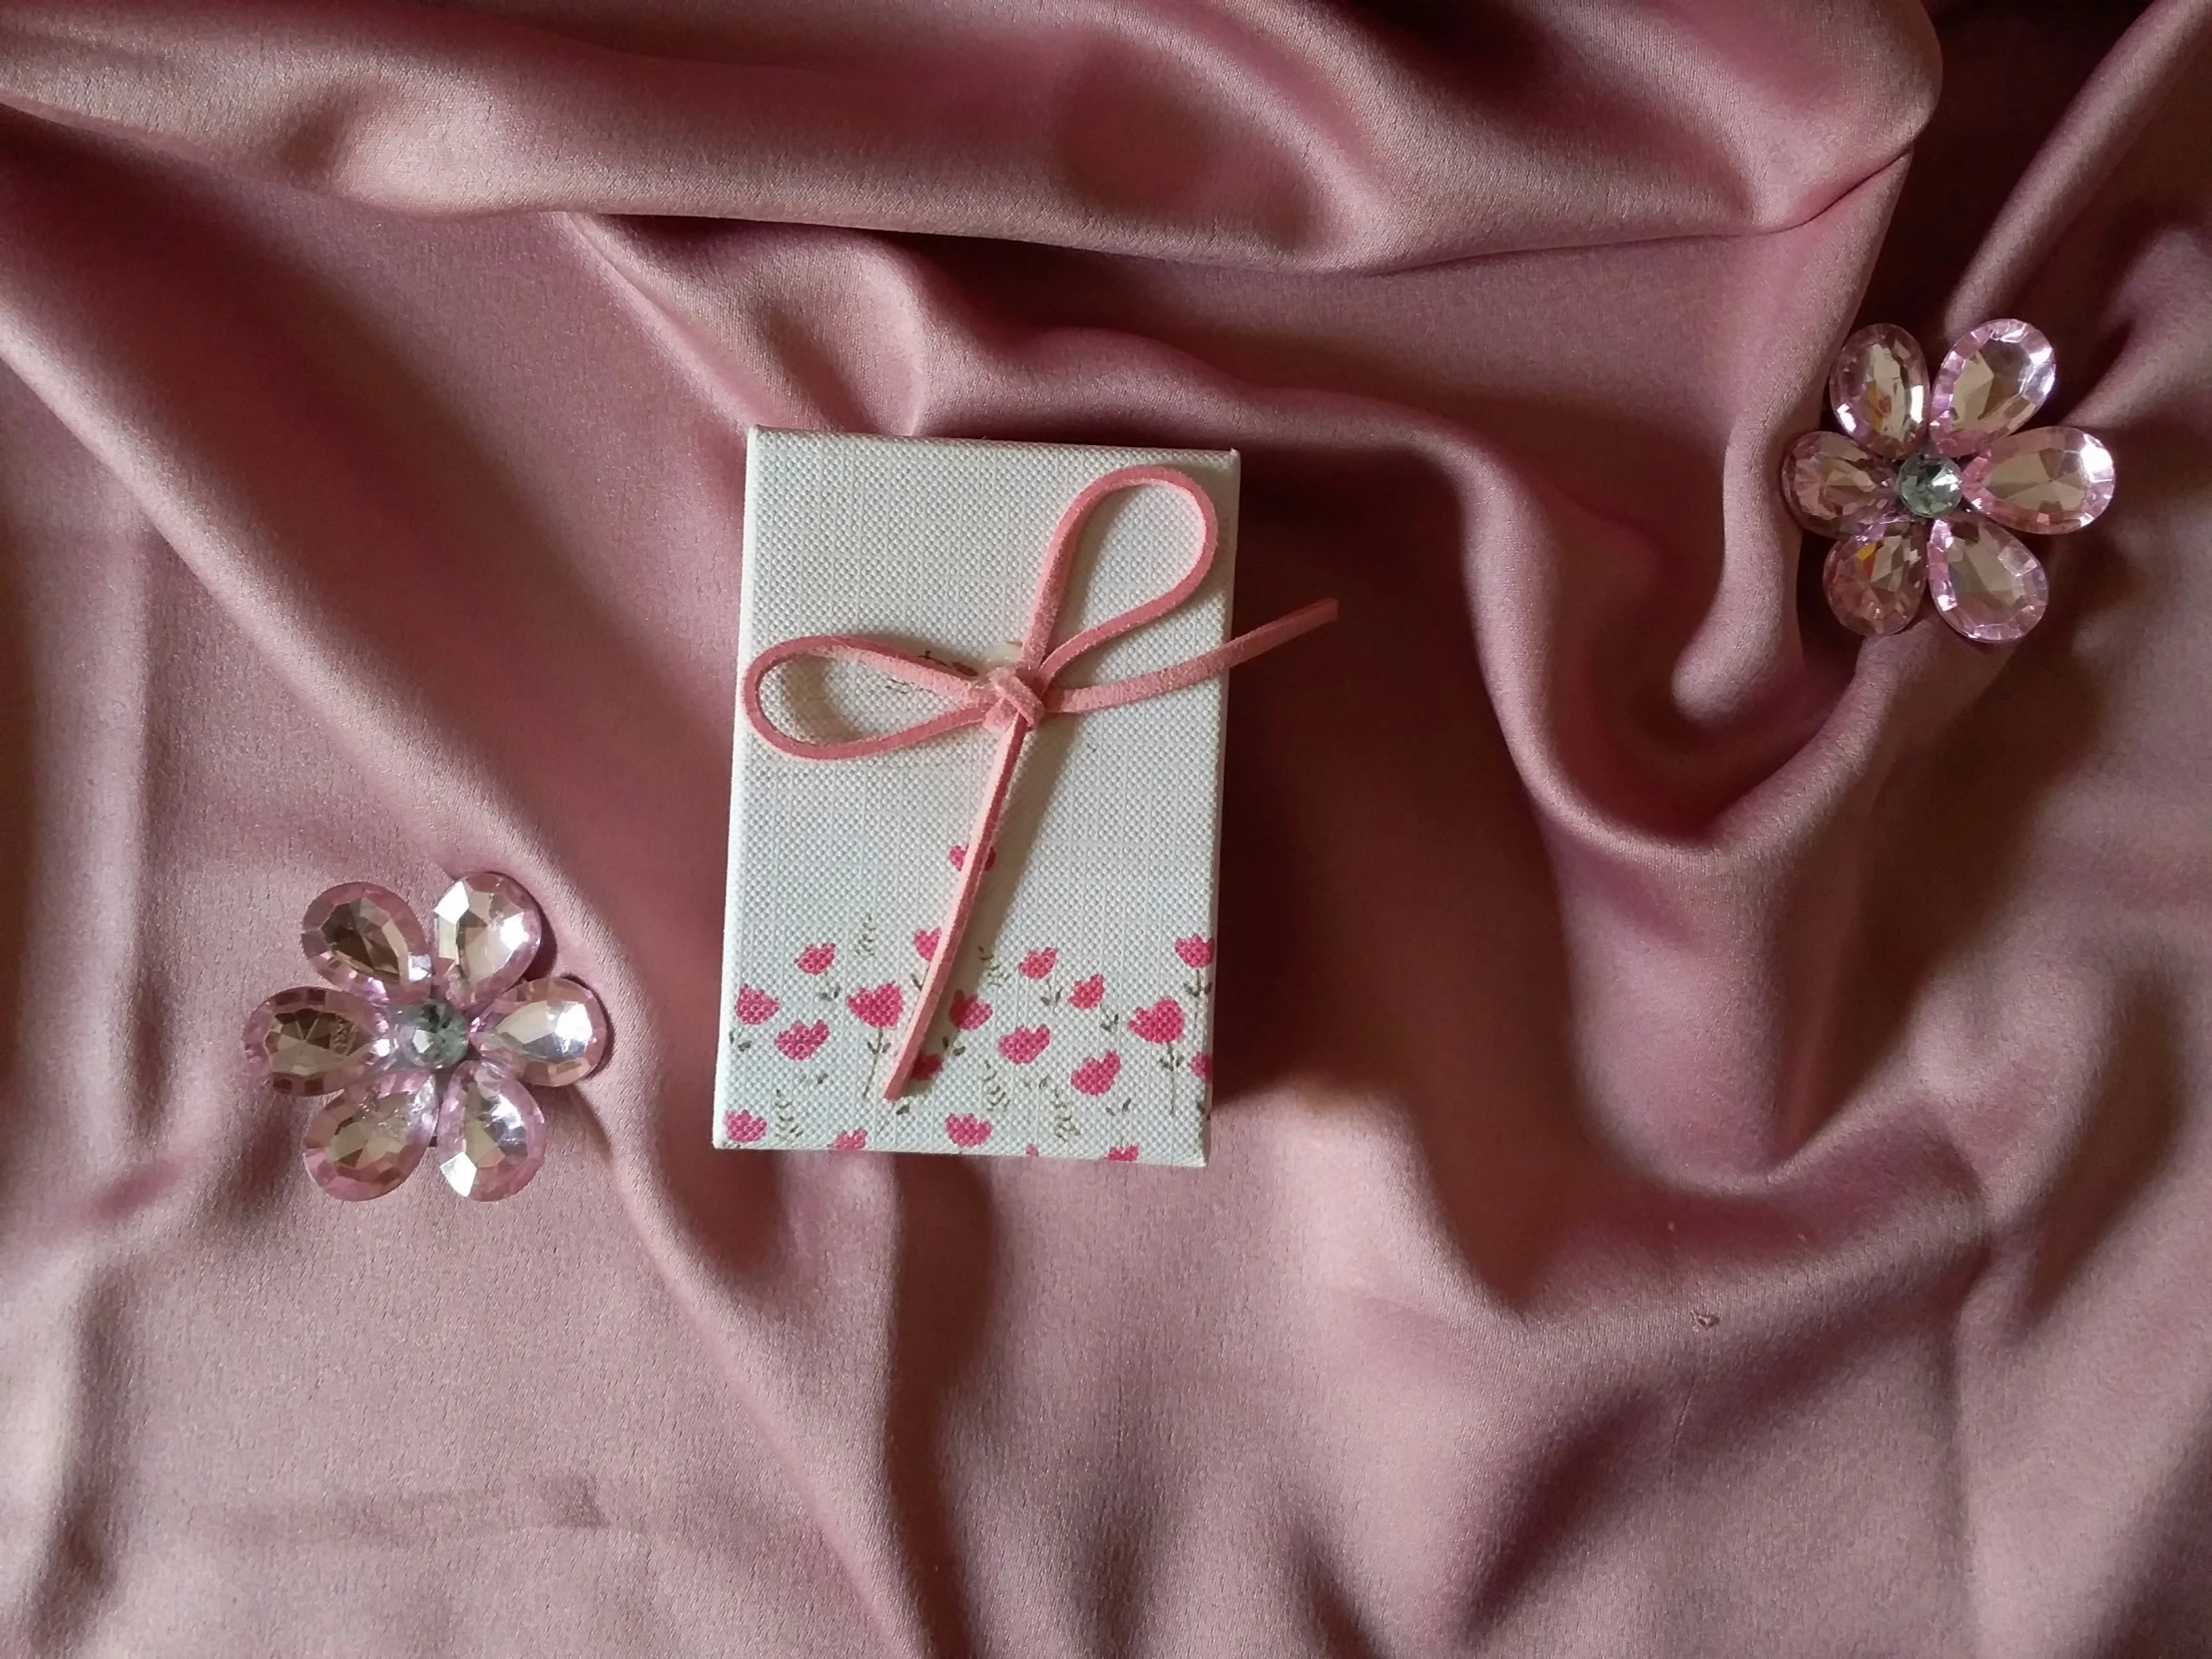 a wrapped gift and flower decorations sit on a pink satin fabric